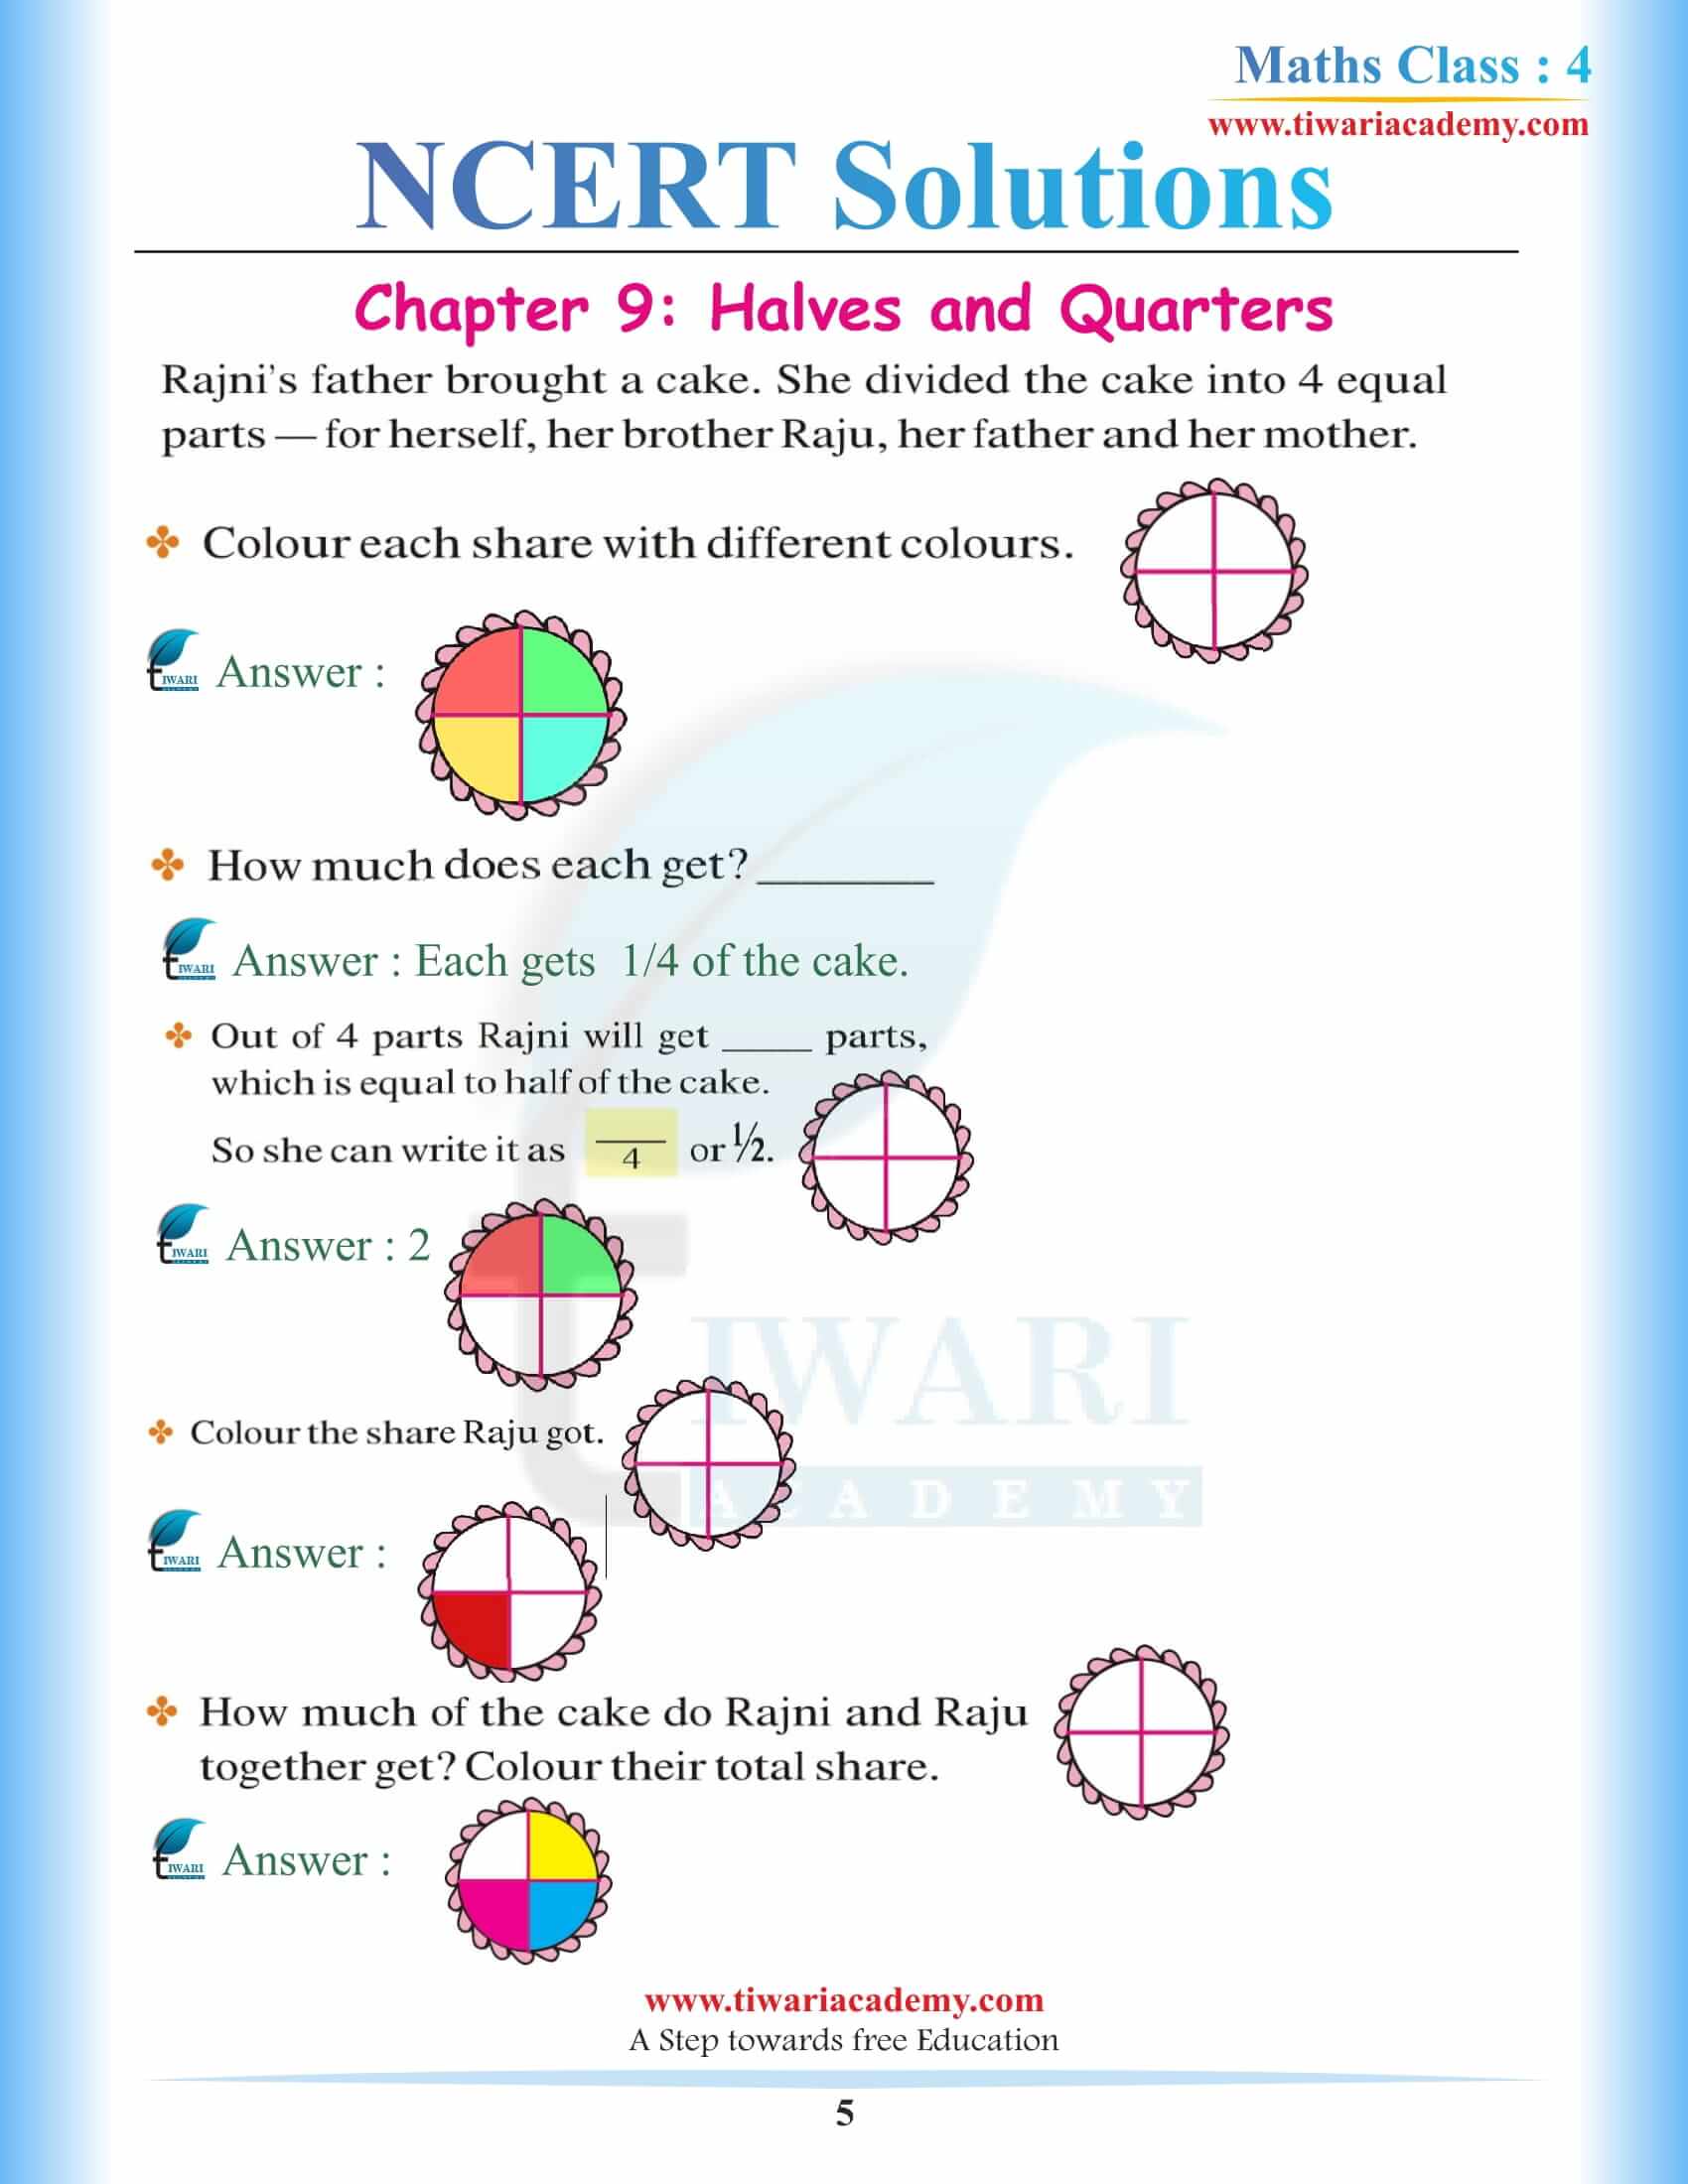 NCERT Solutions for Class 4 Maths Chapter 9 pdf download